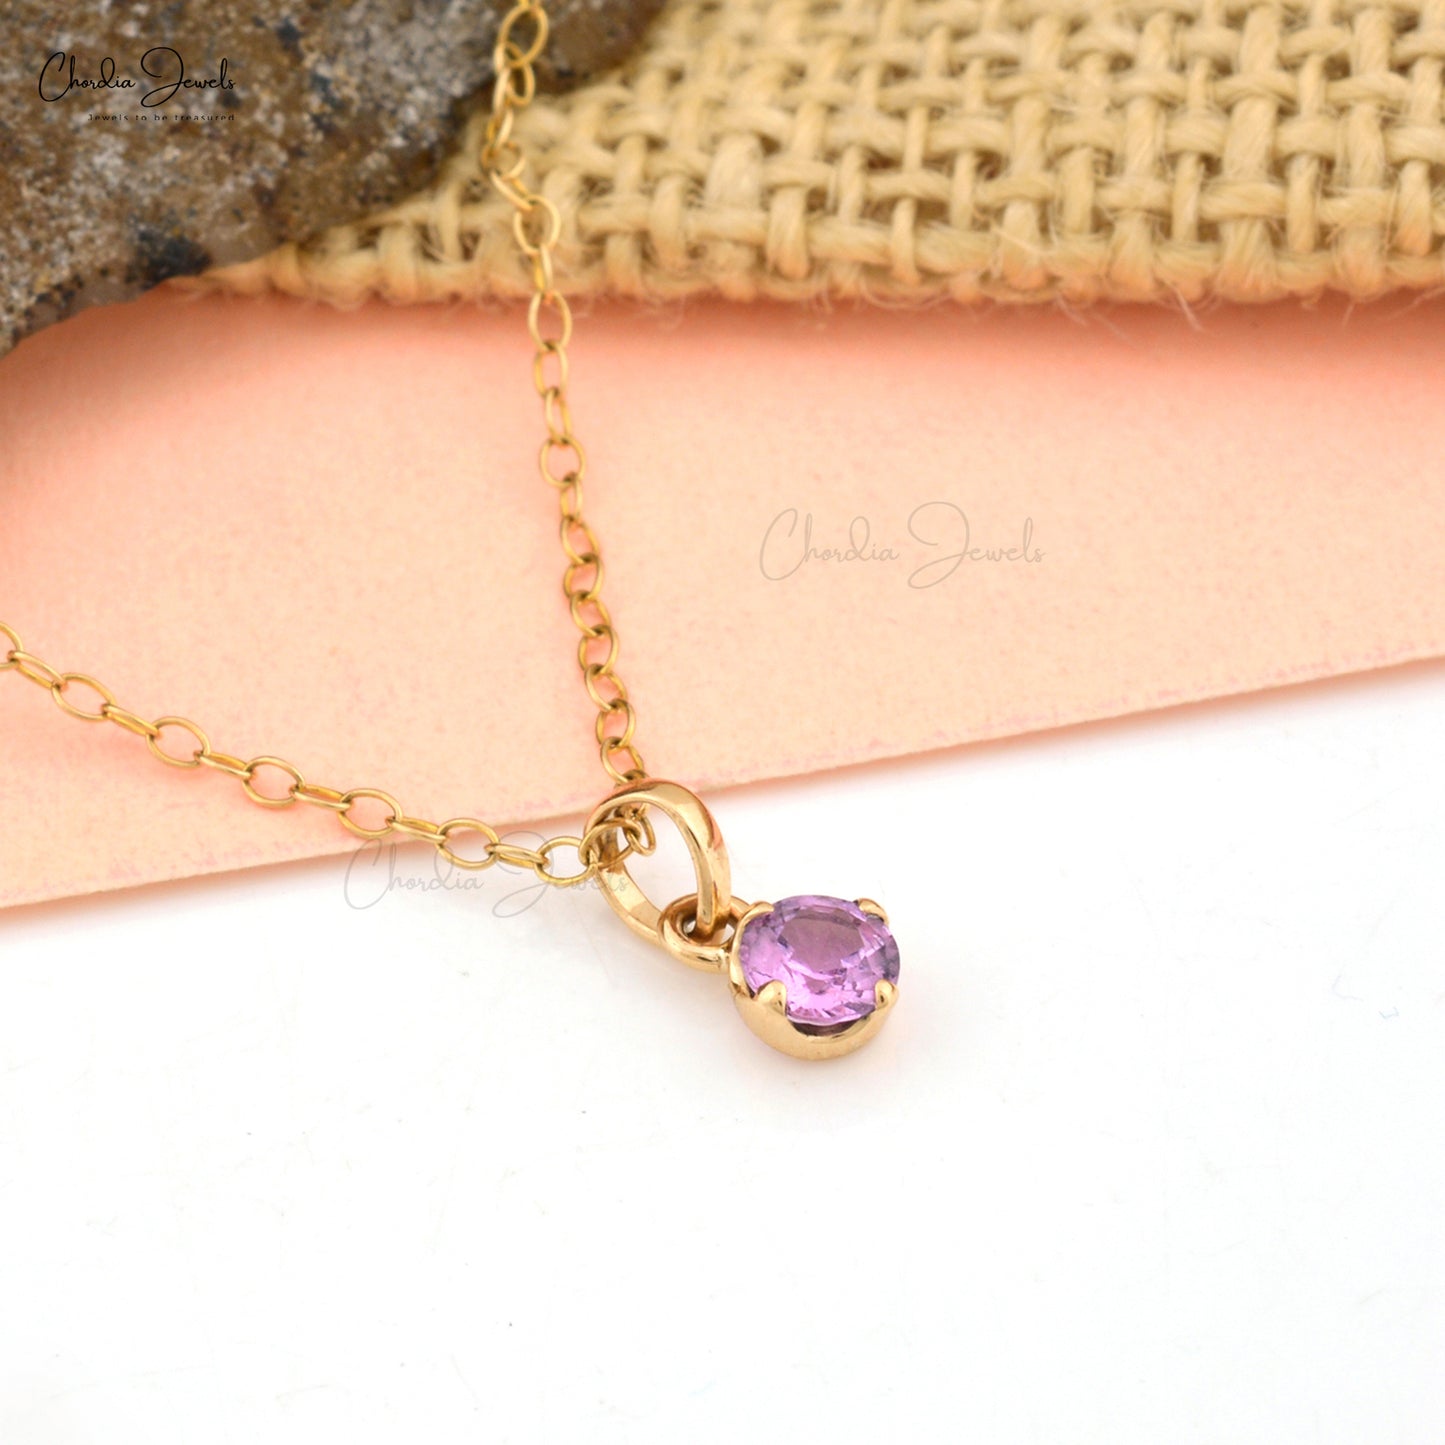 Pure 14k Gold Solitaire Minimal Pendant Necklace With Natural Pink Sapphire Gemstone Gift For Women's Day